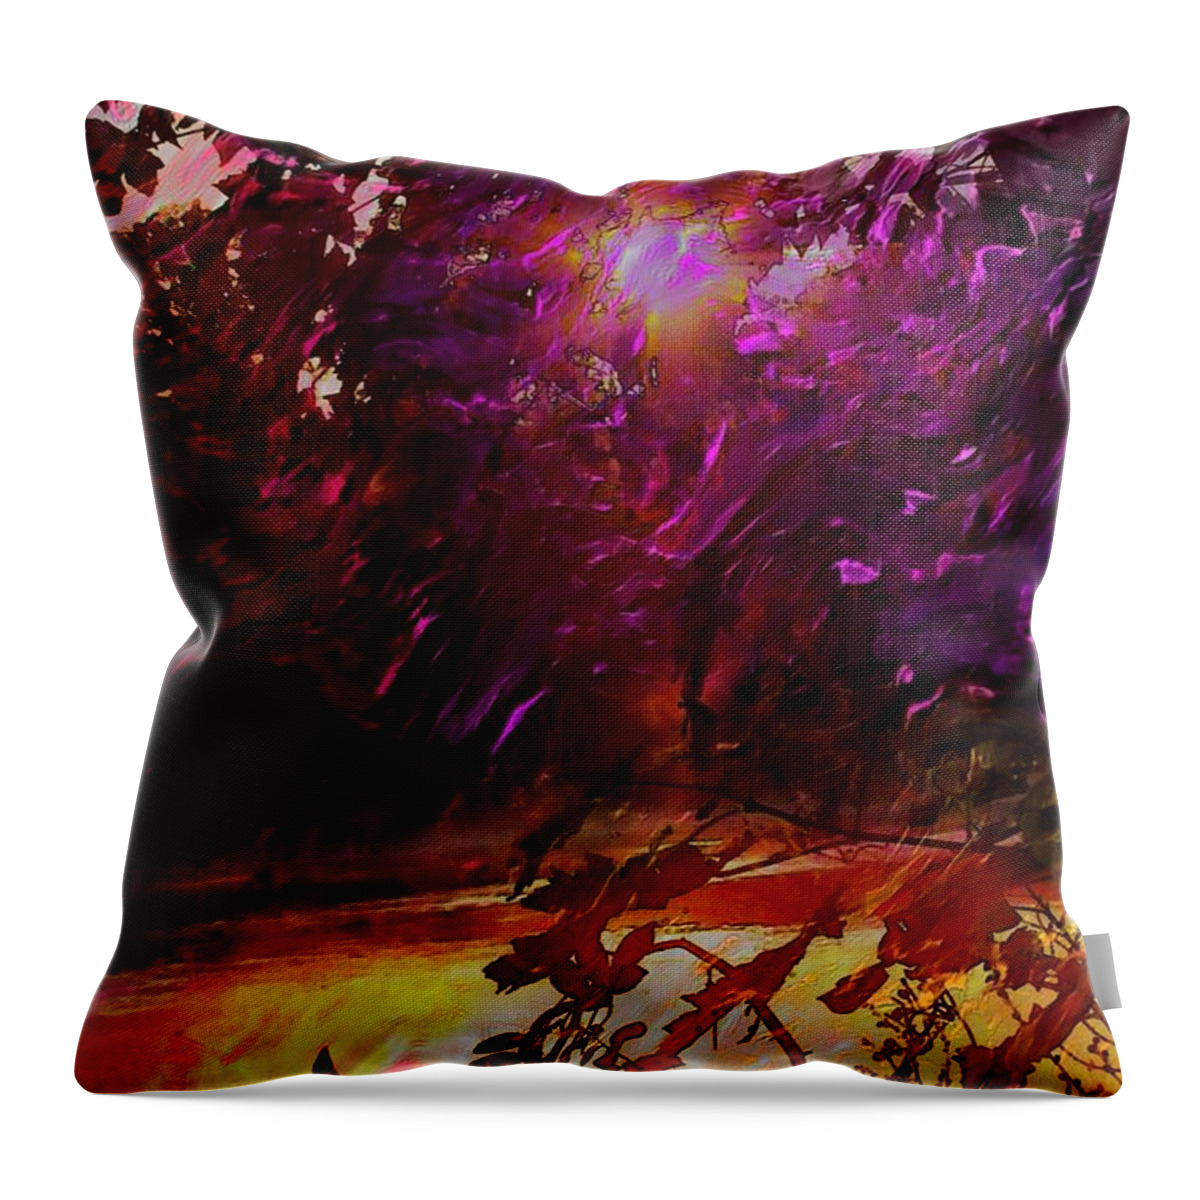 Lake Throw Pillow featuring the digital art Another Day is Done by Steven Lebron Langston